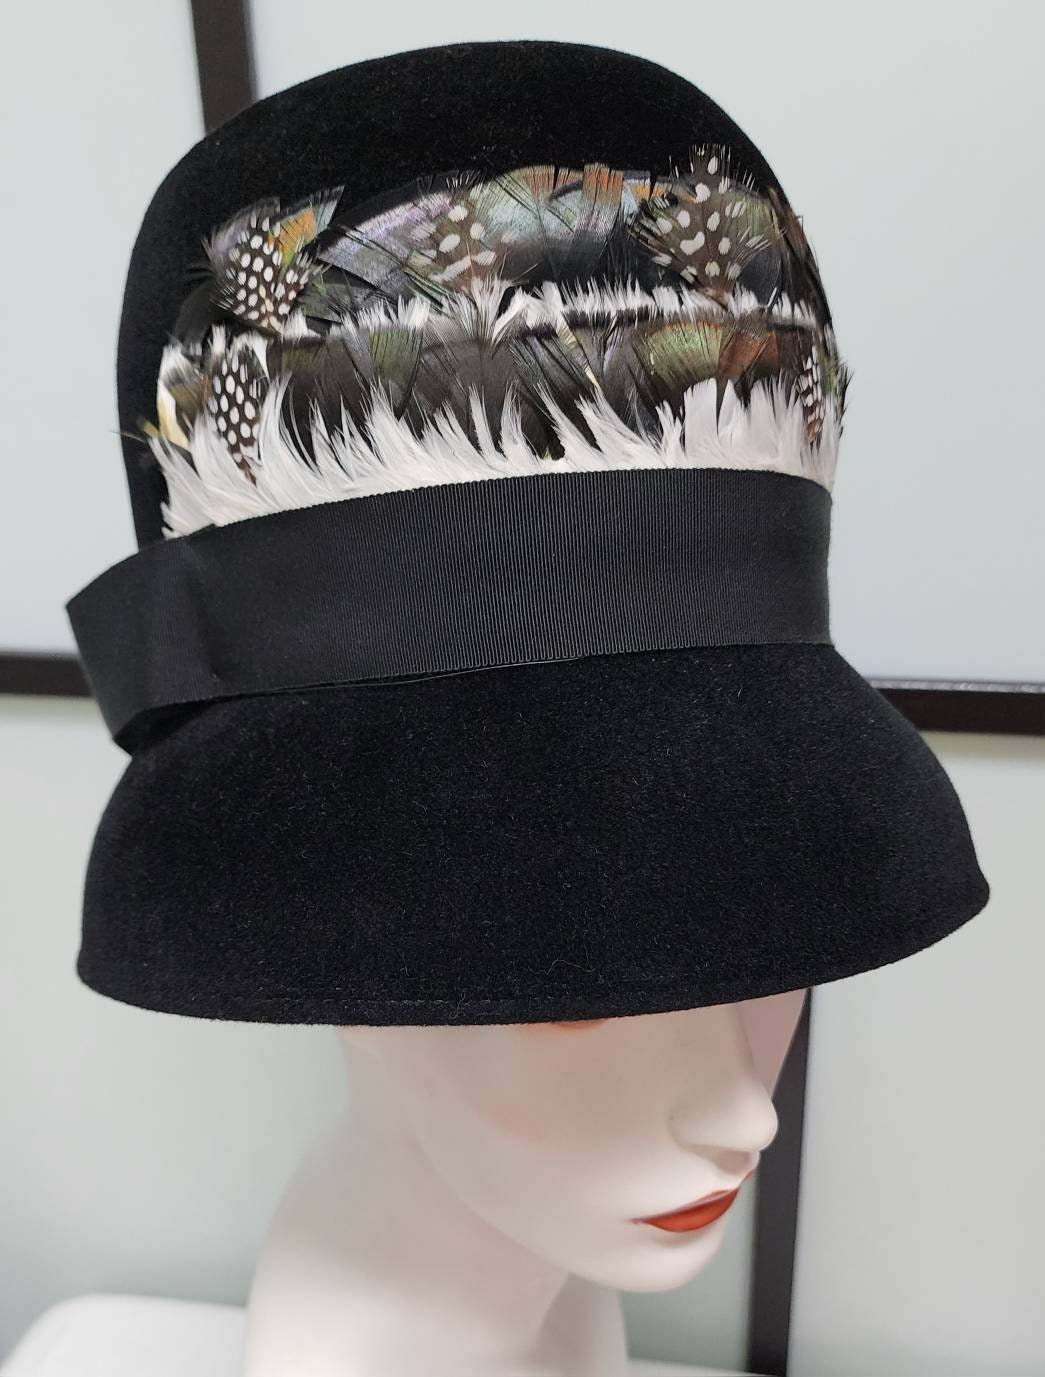 Vintage Feather Hat 1960s Tall Round Black Wool Felt Bucket Hat Black White Brown Feathers Mod Boho 21.5 inches